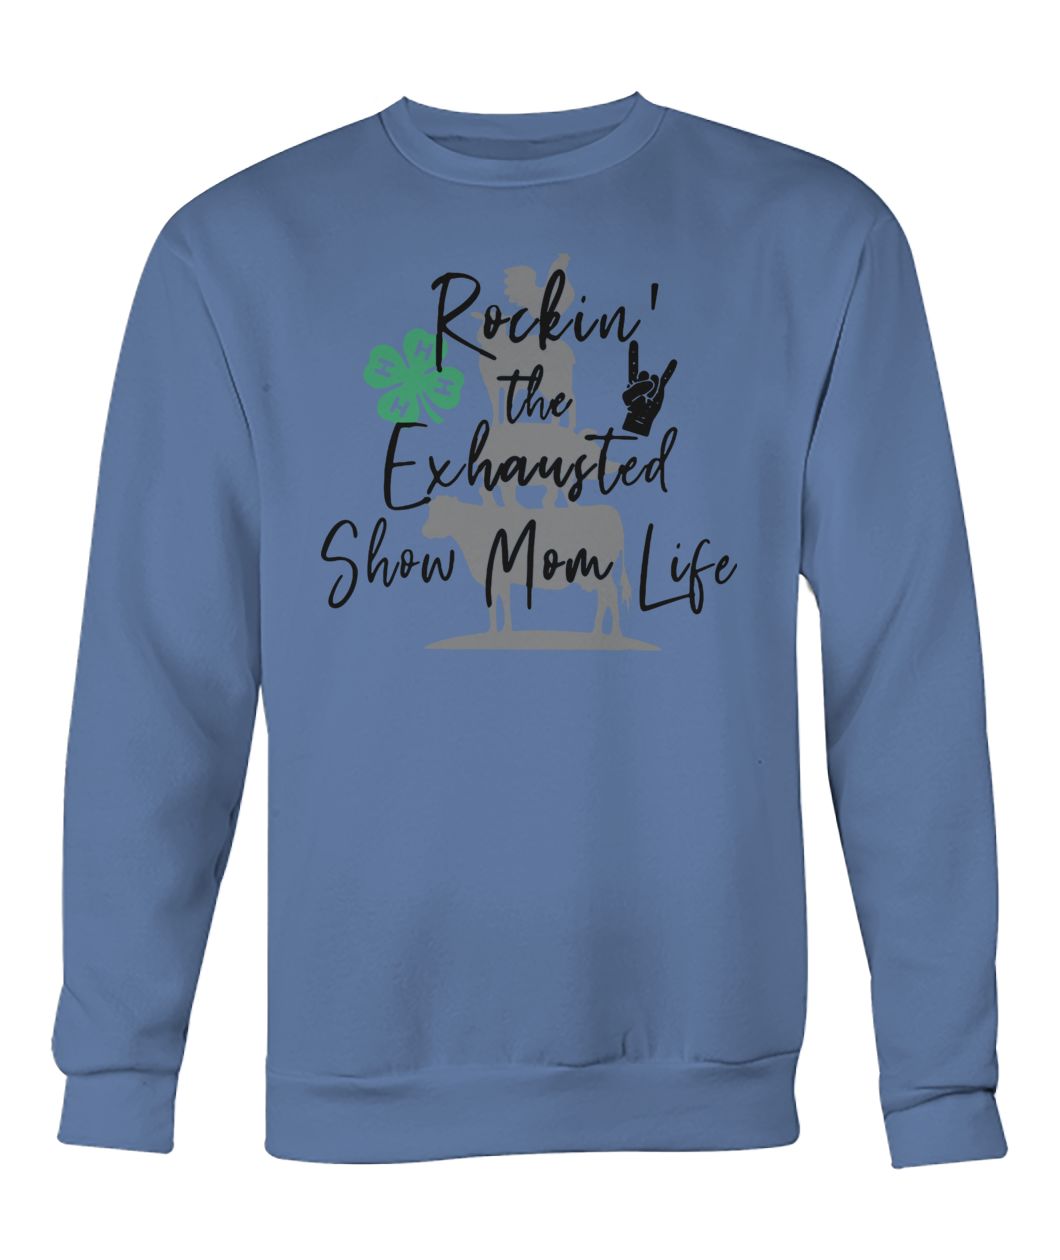 Barbecue with cow pig and chicken rockin' the exhausted show mom life crew neck sweatshirt